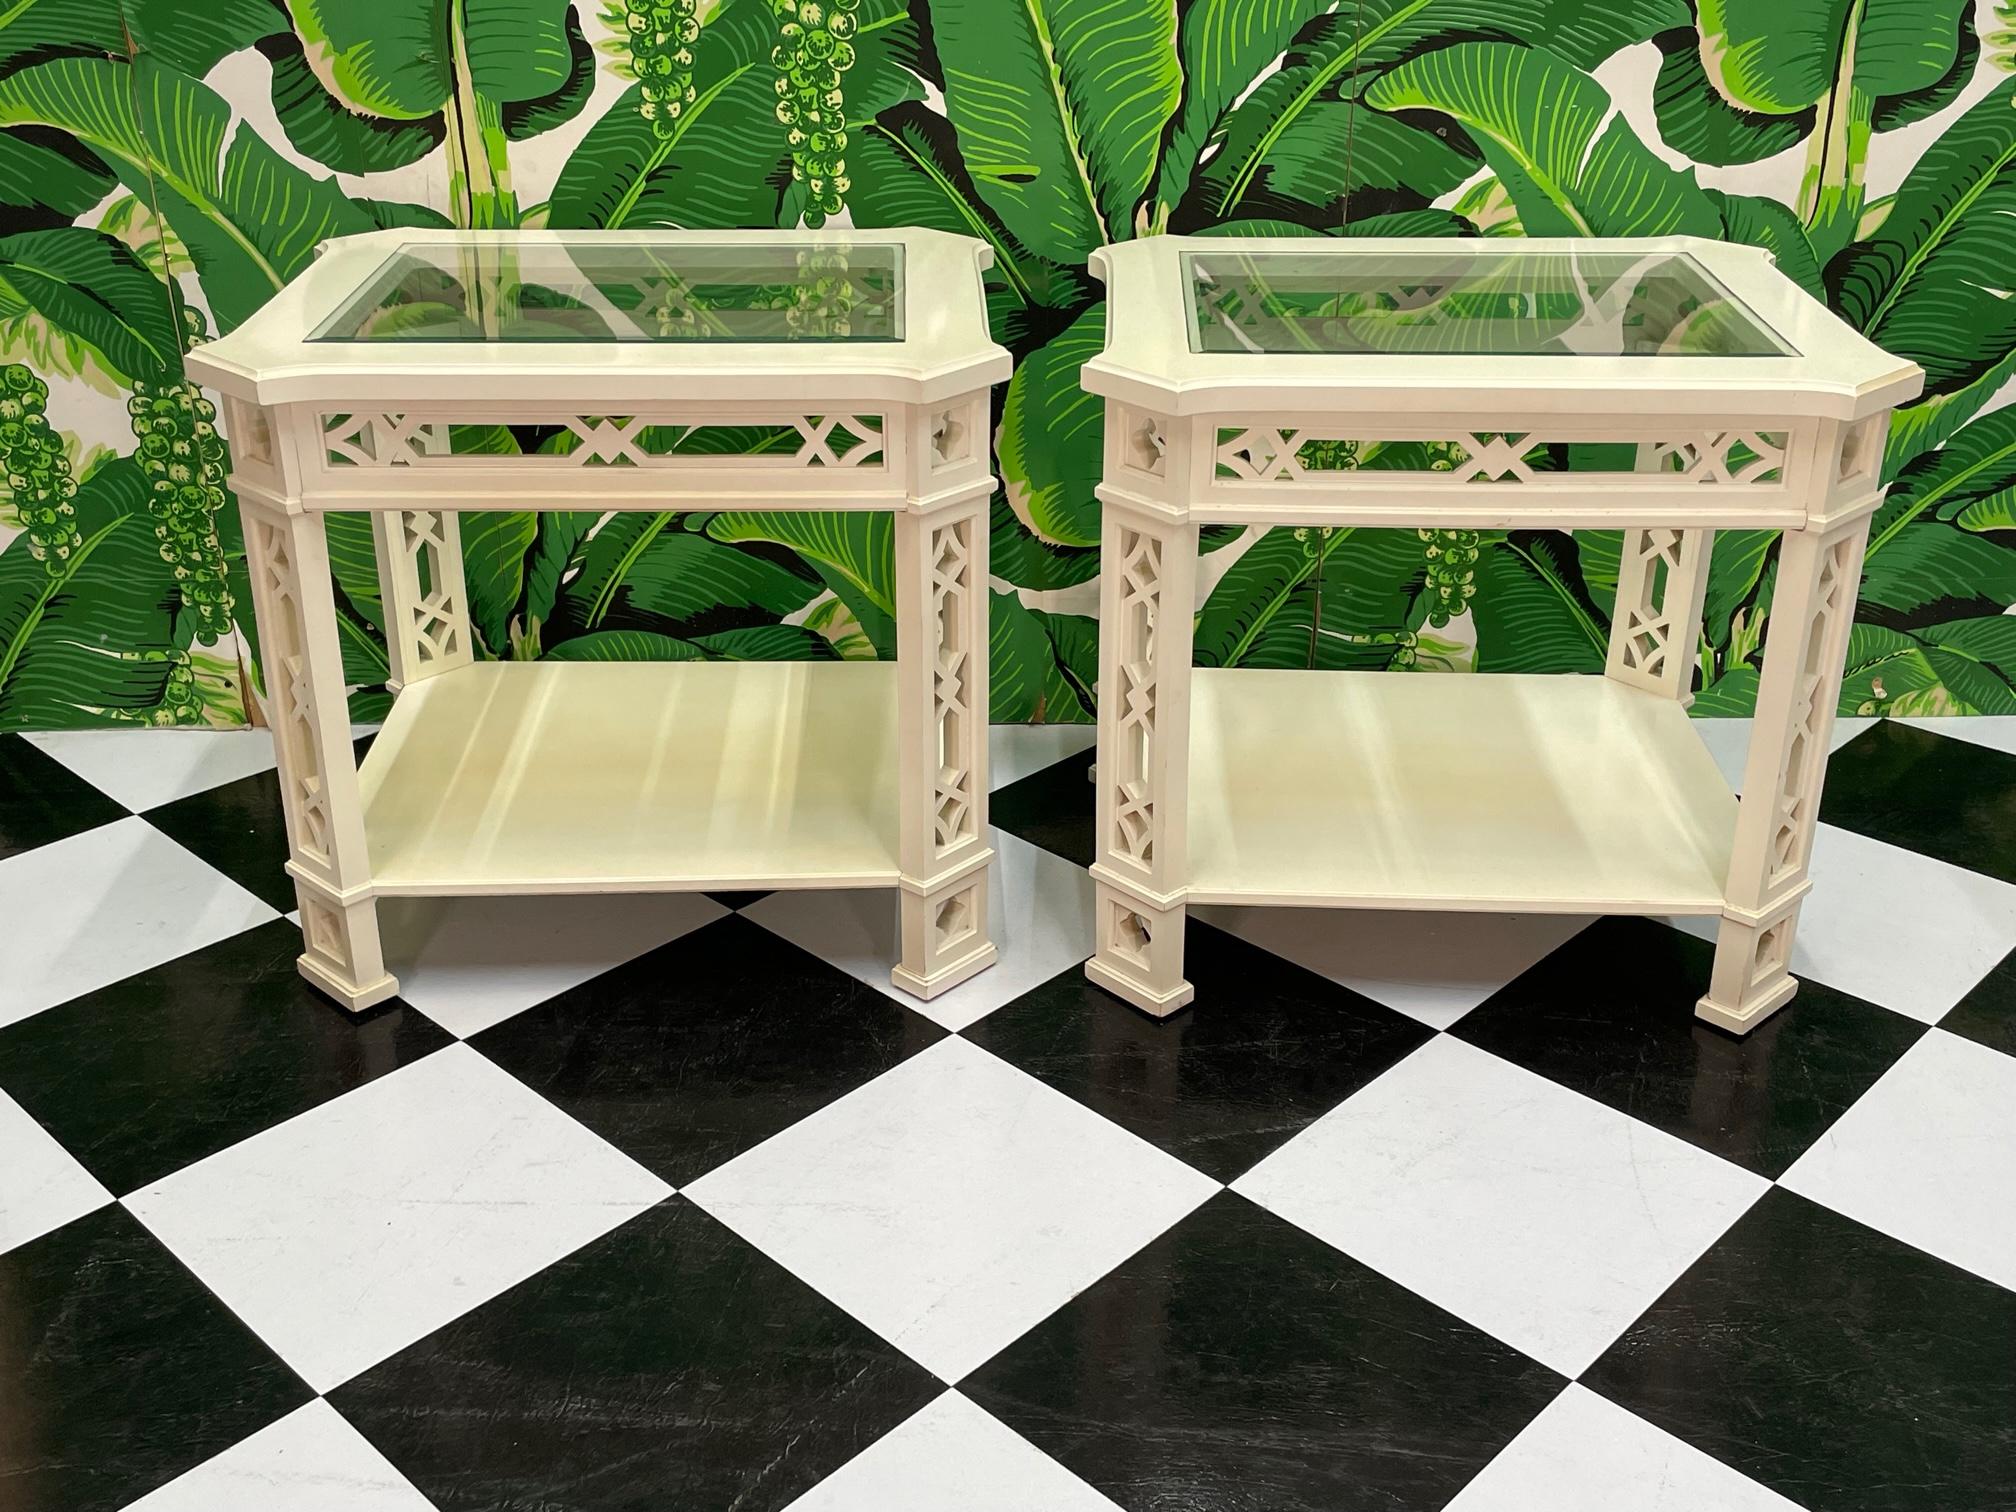 Vintage side tables by Thomasville features ornate modern fretwork, and a glass top. Good condition with minor imperfections consistent with age, see photos for condition details.
For a shipping quote to your exact zip code, please message us.
